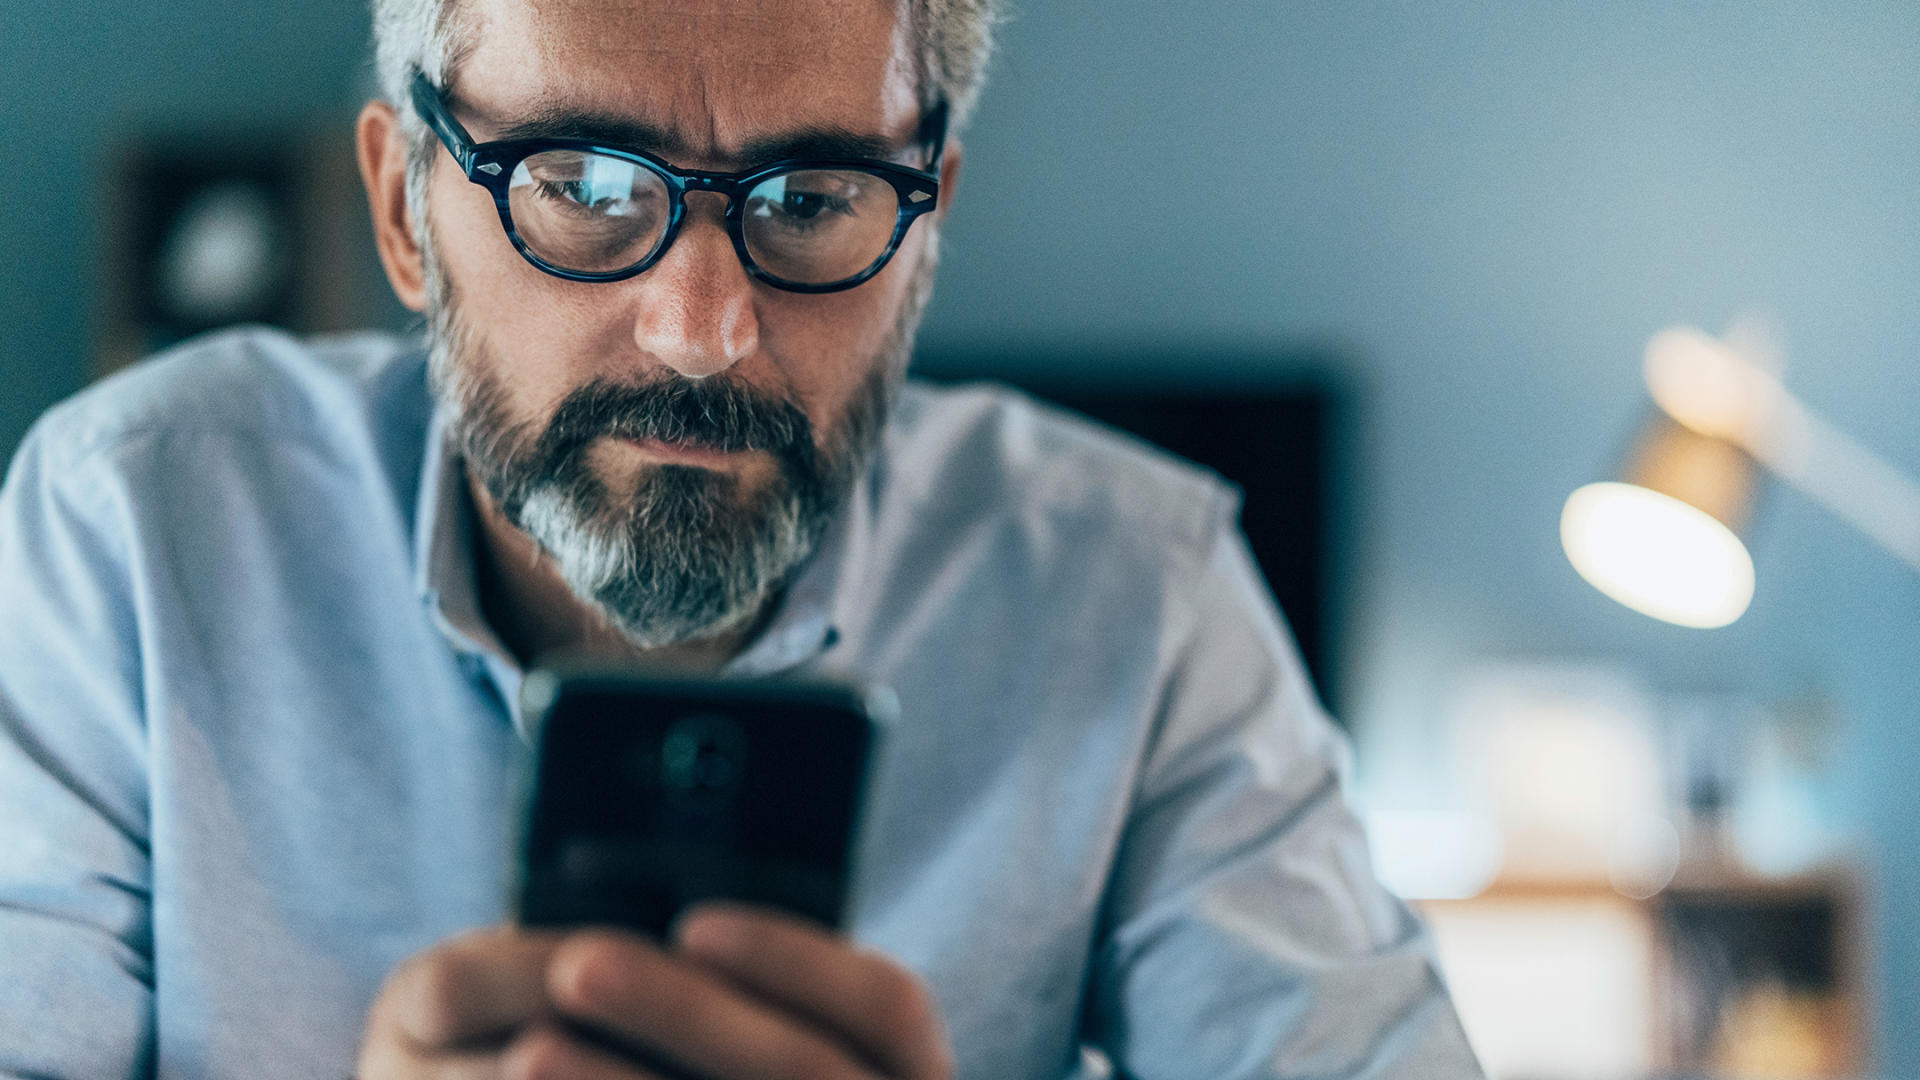 A man with glasses looking at his smartphone.